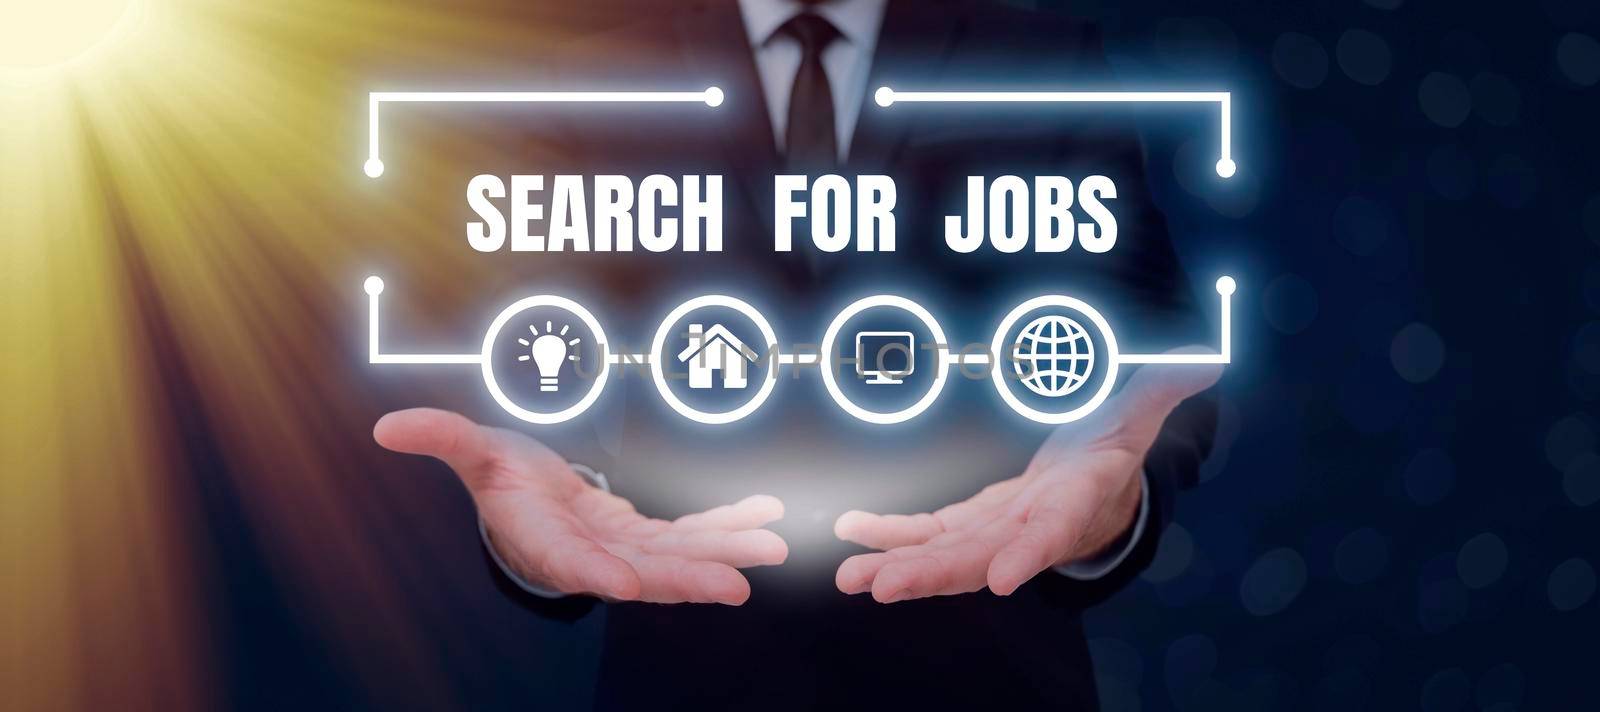 Inspiration showing sign Search For Jobs, Word for Unemployed looking for new opportunities Headhunting Man Holding A Pen And Tablet Showing Important Messages And New Ideas.